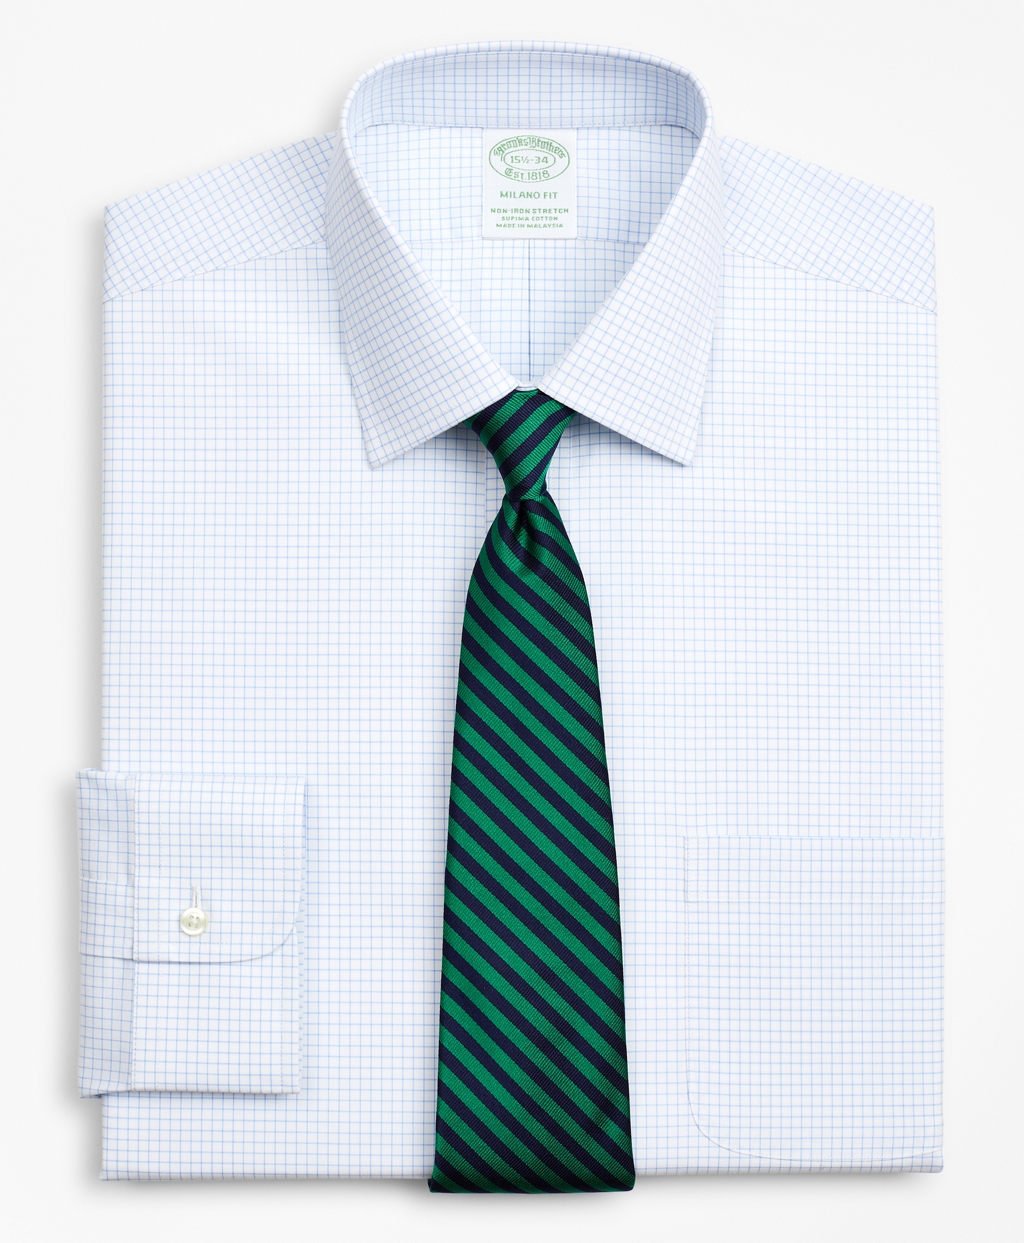 Brooksbrothers Stretch Milano Slim-Fit Dress Shirt, Non-Iron Poplin Ainsley Collar Small Grid Check